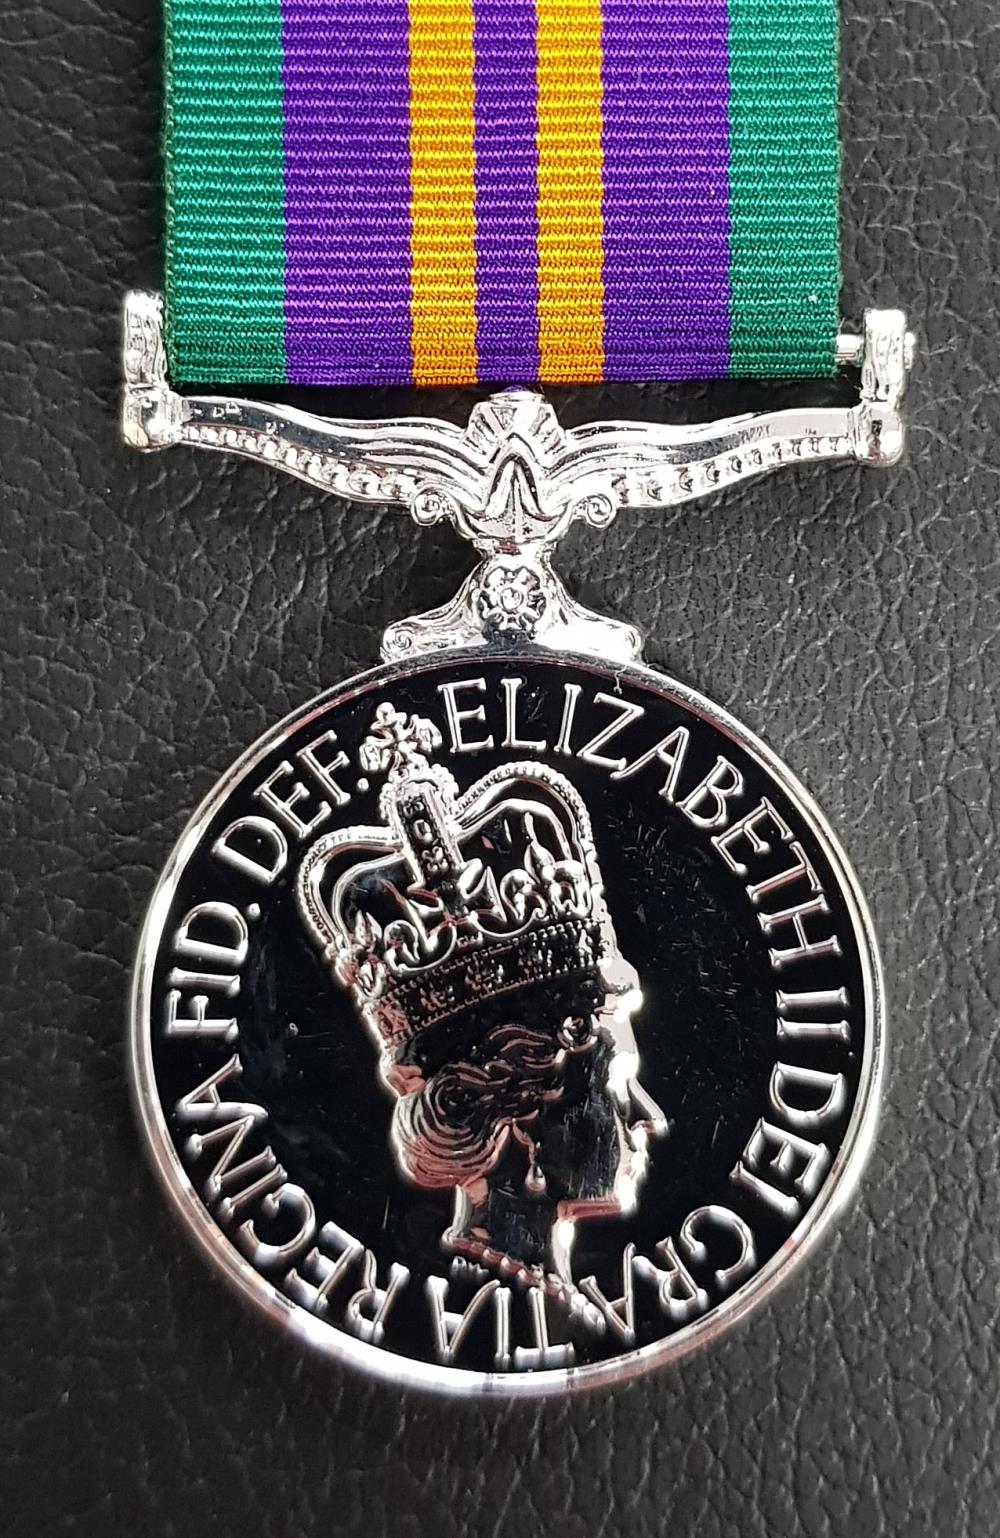 Worcestershire Medal Service: Accumulated Campaign Service Medal (2011)